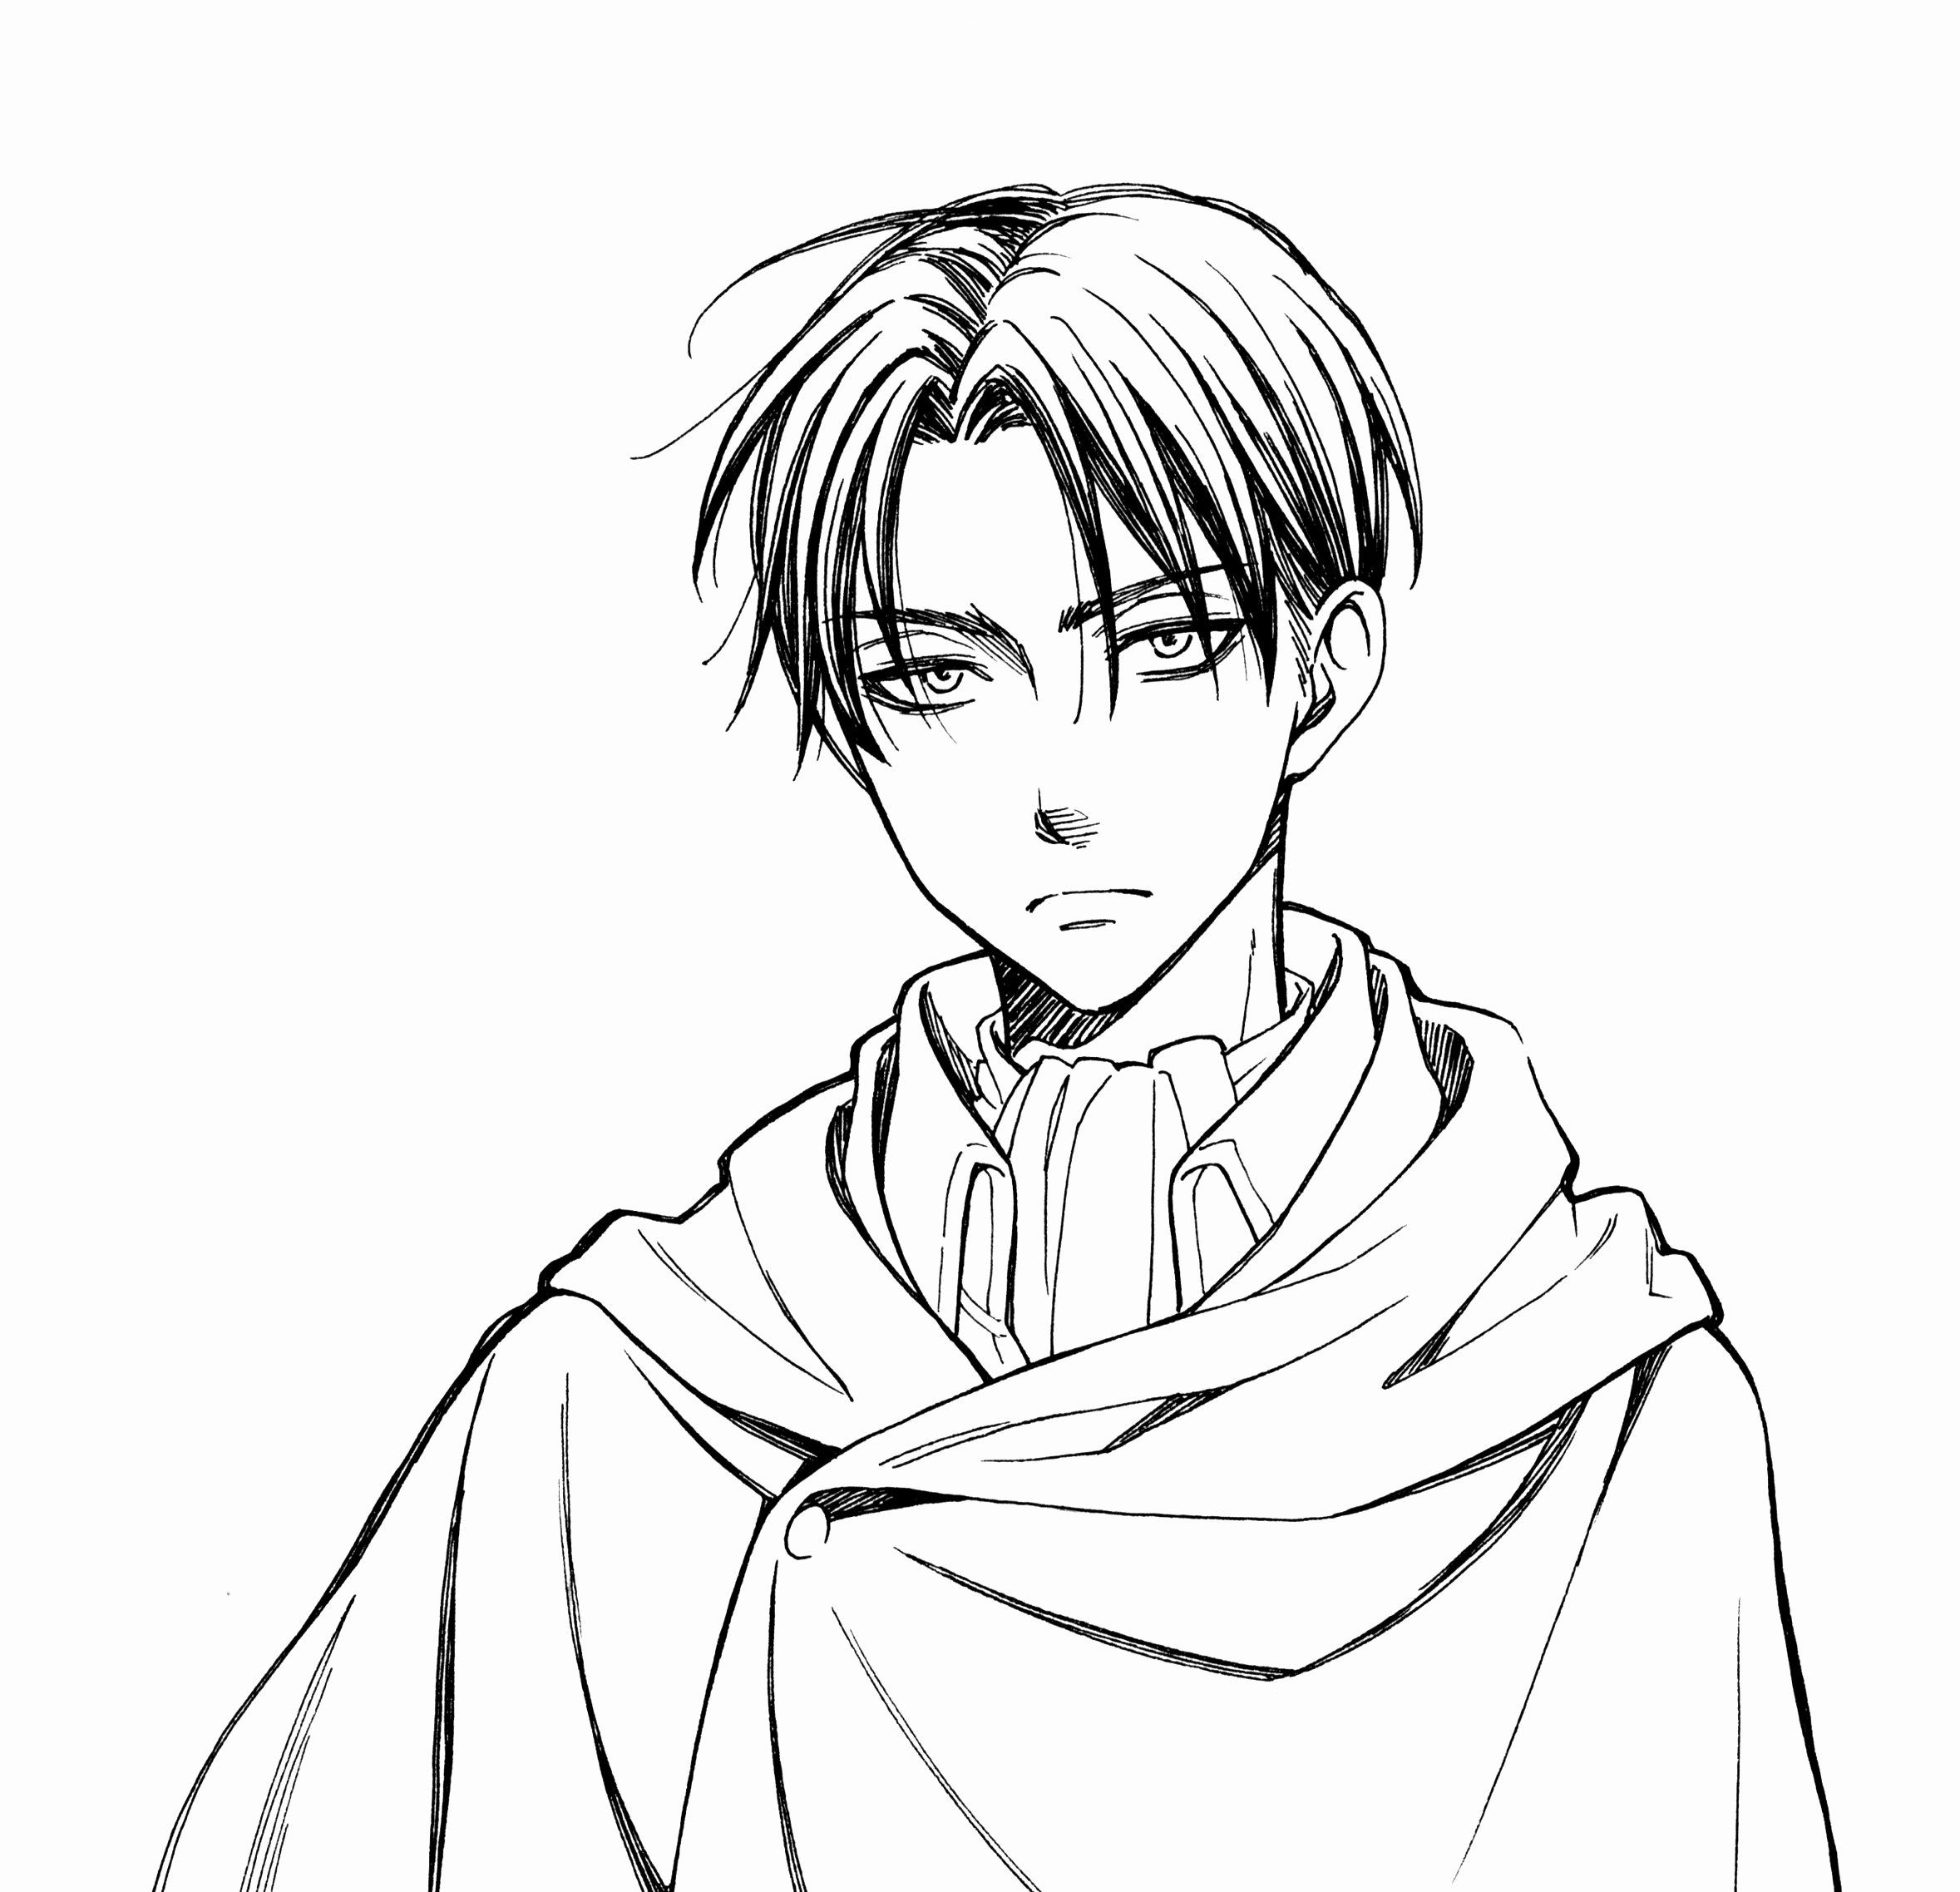 Attack On Titan Coloring Page Best Of Levi attack On Titan Image Zerochan  Anime | Attack on titan levi, Levi ackerman, Attack on titan